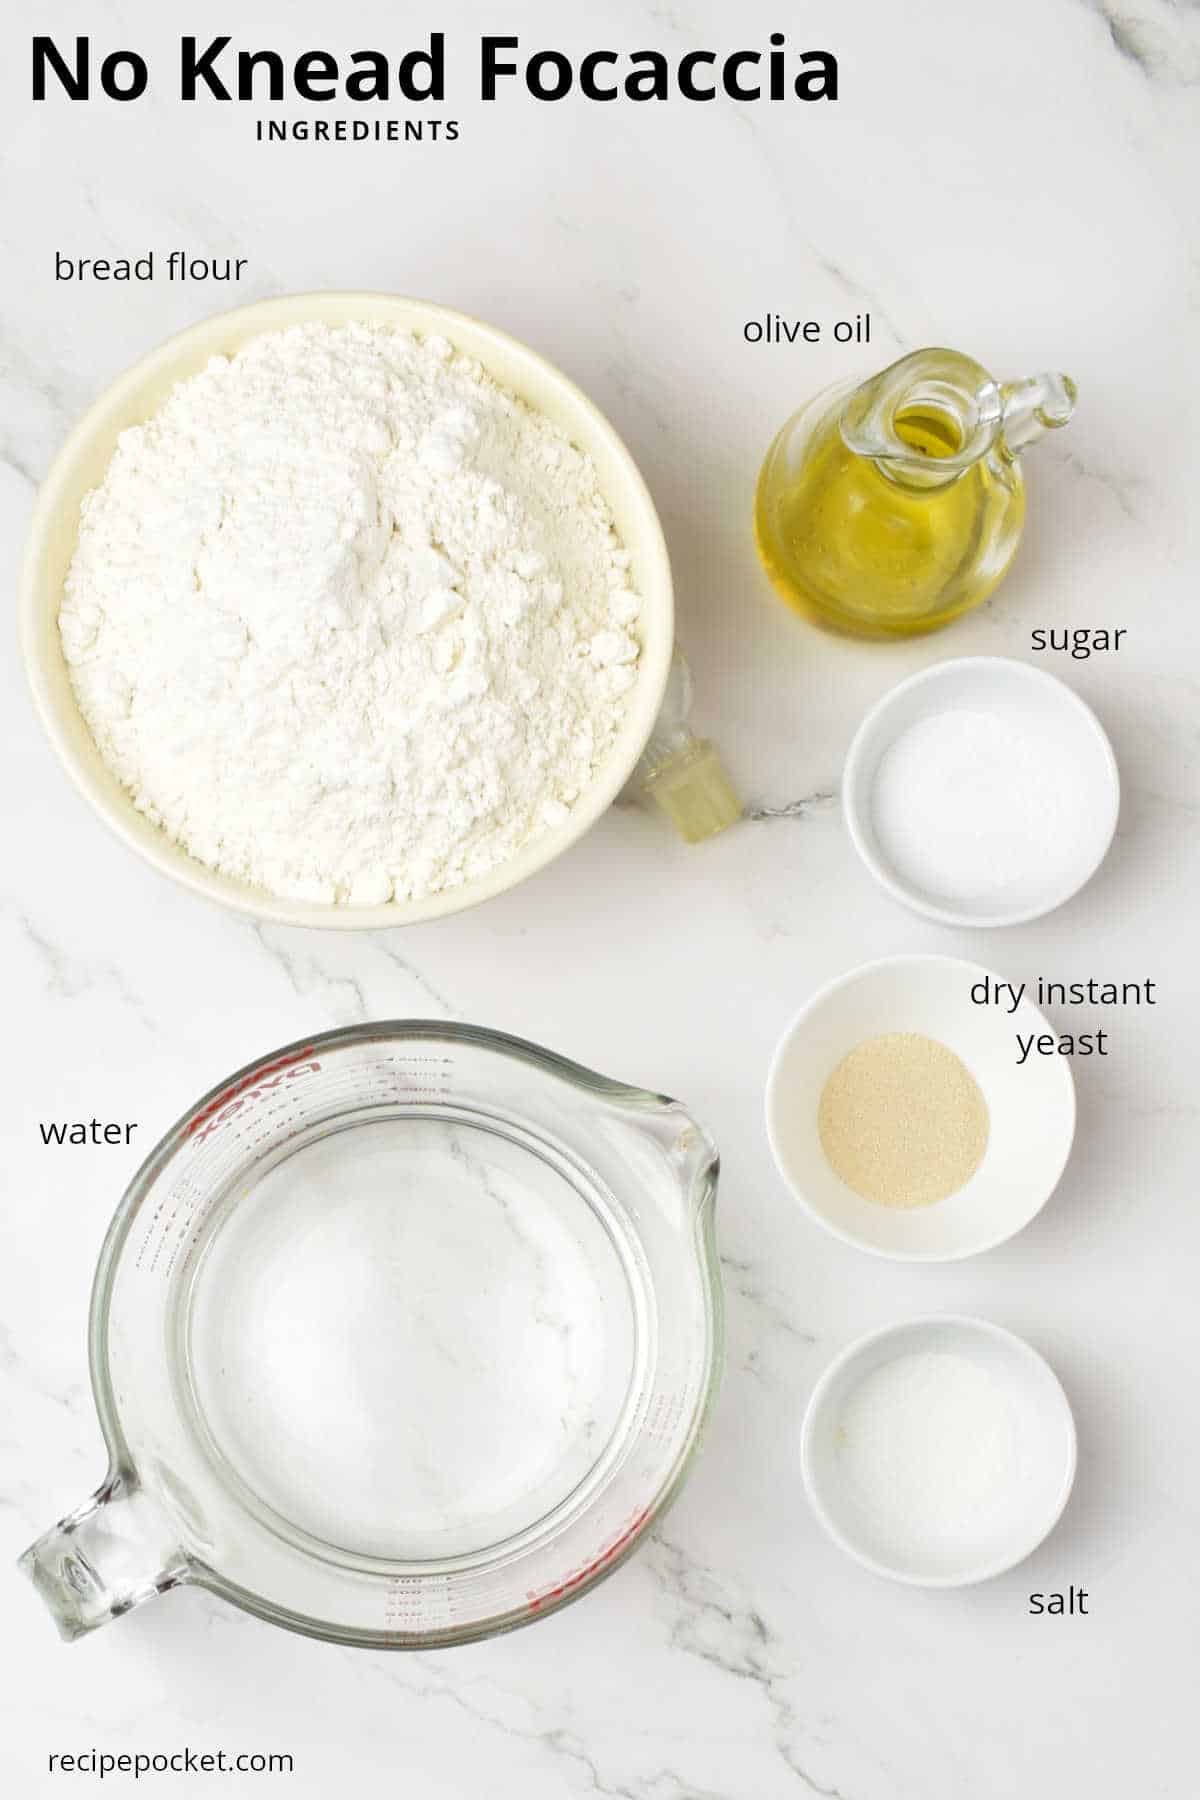 Image showing flour, water, yeast, salt and sugar for fociccia bread.